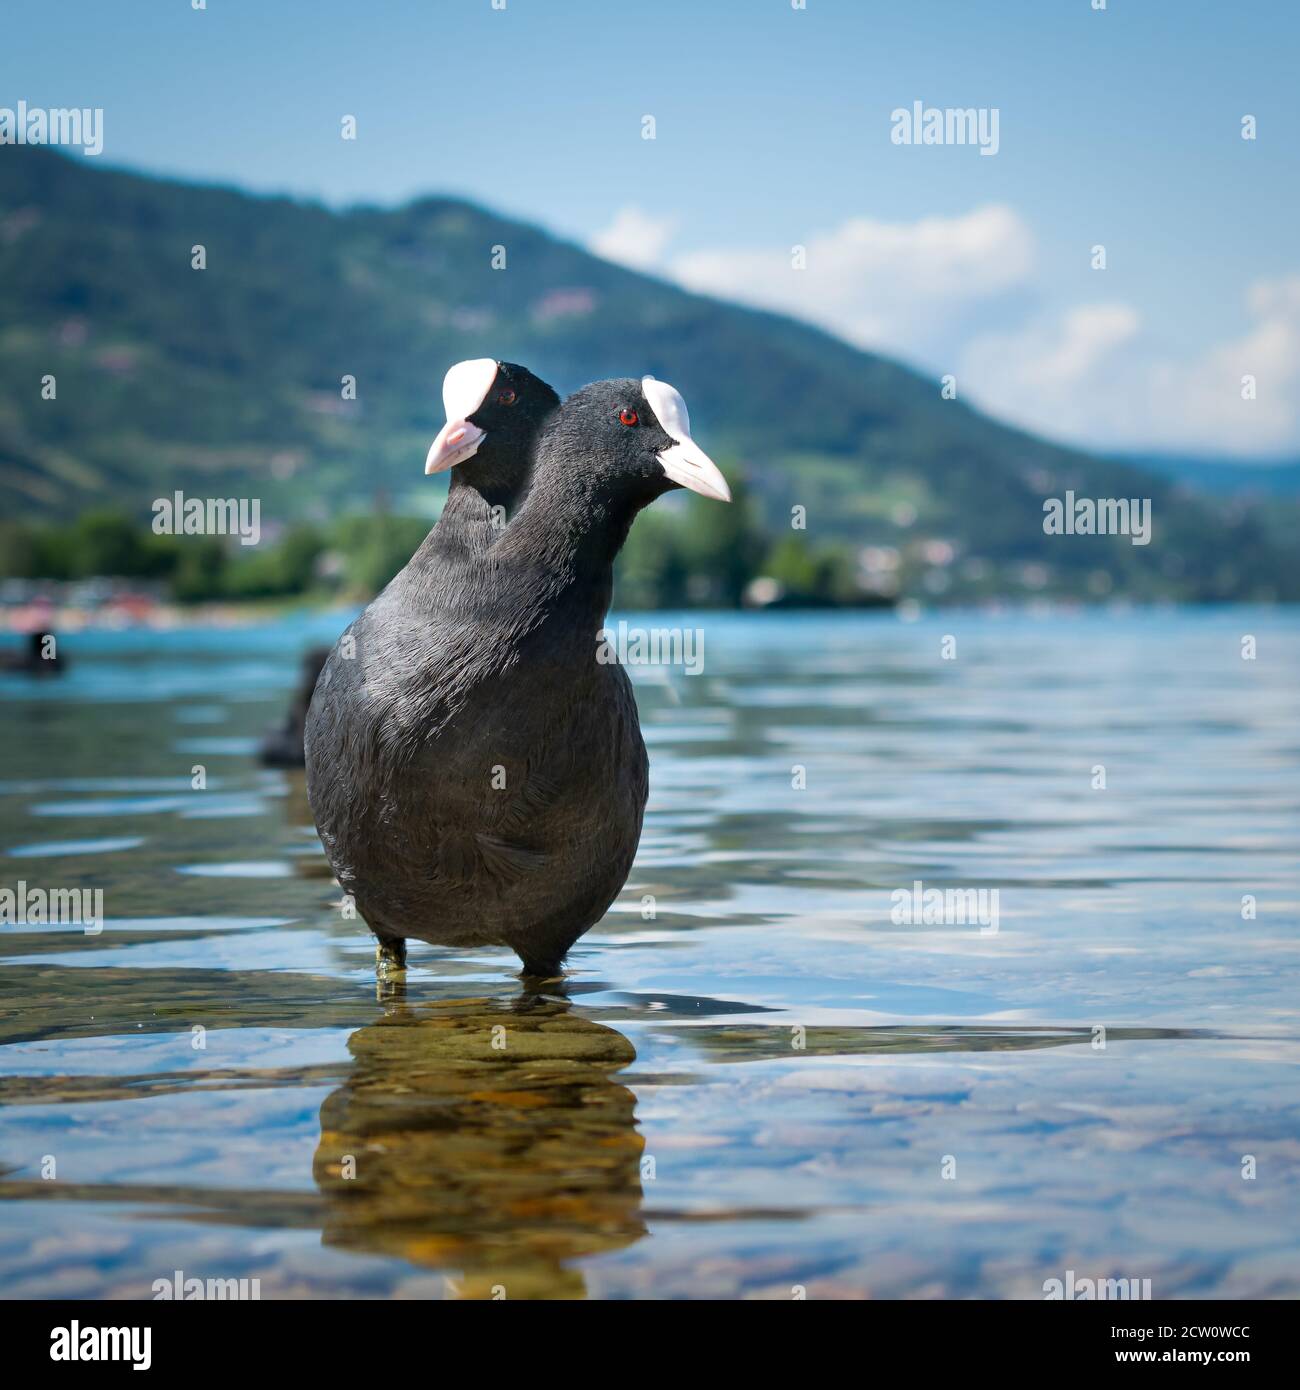 European water bird, depicted standing in the shallow water of the lake with two heads. Caldonazzo lake, Trentino Alto Adige, Italy Stock Photo